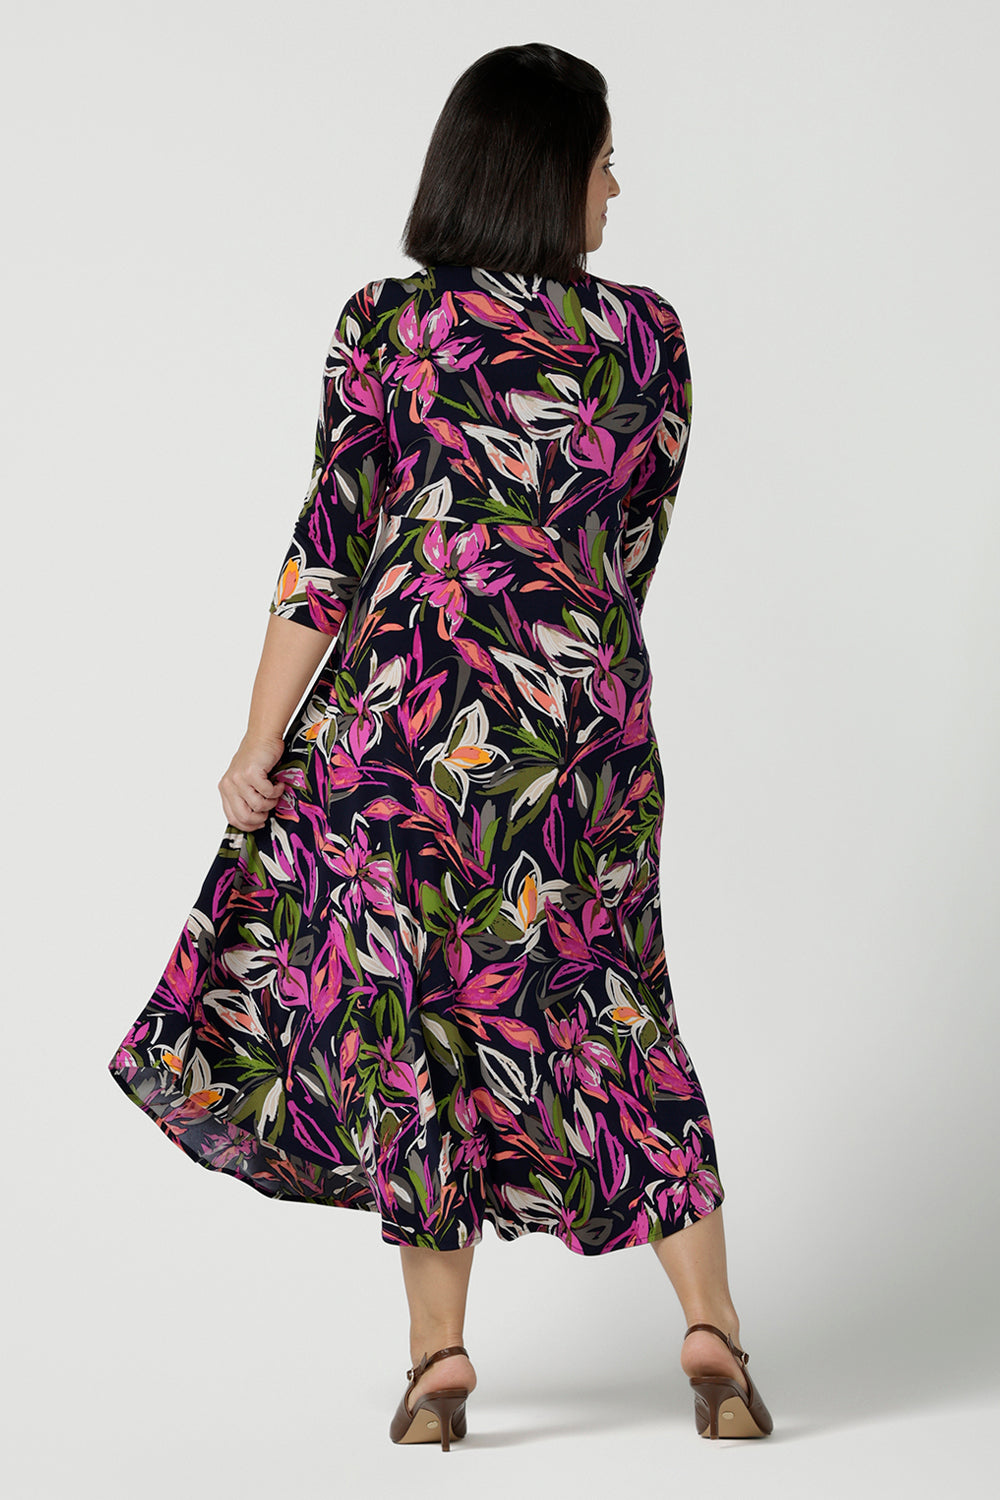 Back view of a size 10 woman wears a Kyra dress in Vivid Flora. Empire line fit and flare style with a 3/4 sleeve. Twist front neckline. Flattering shape for all sizes 8 - 24. Made in Australia for corporate casual women.